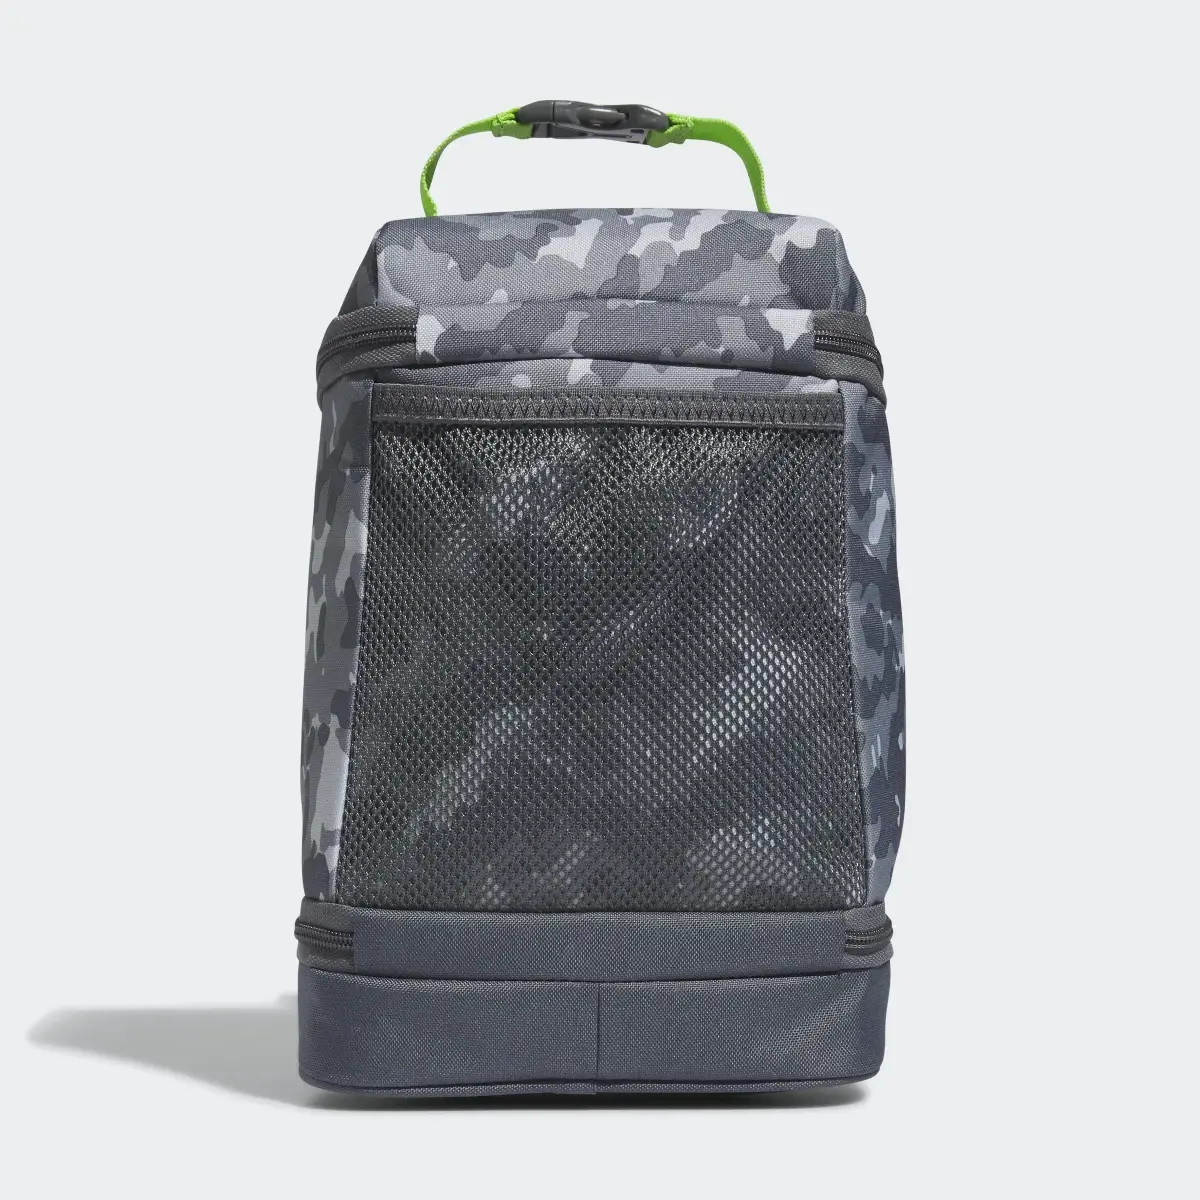 Adidas Excel Lunch Bag. 3